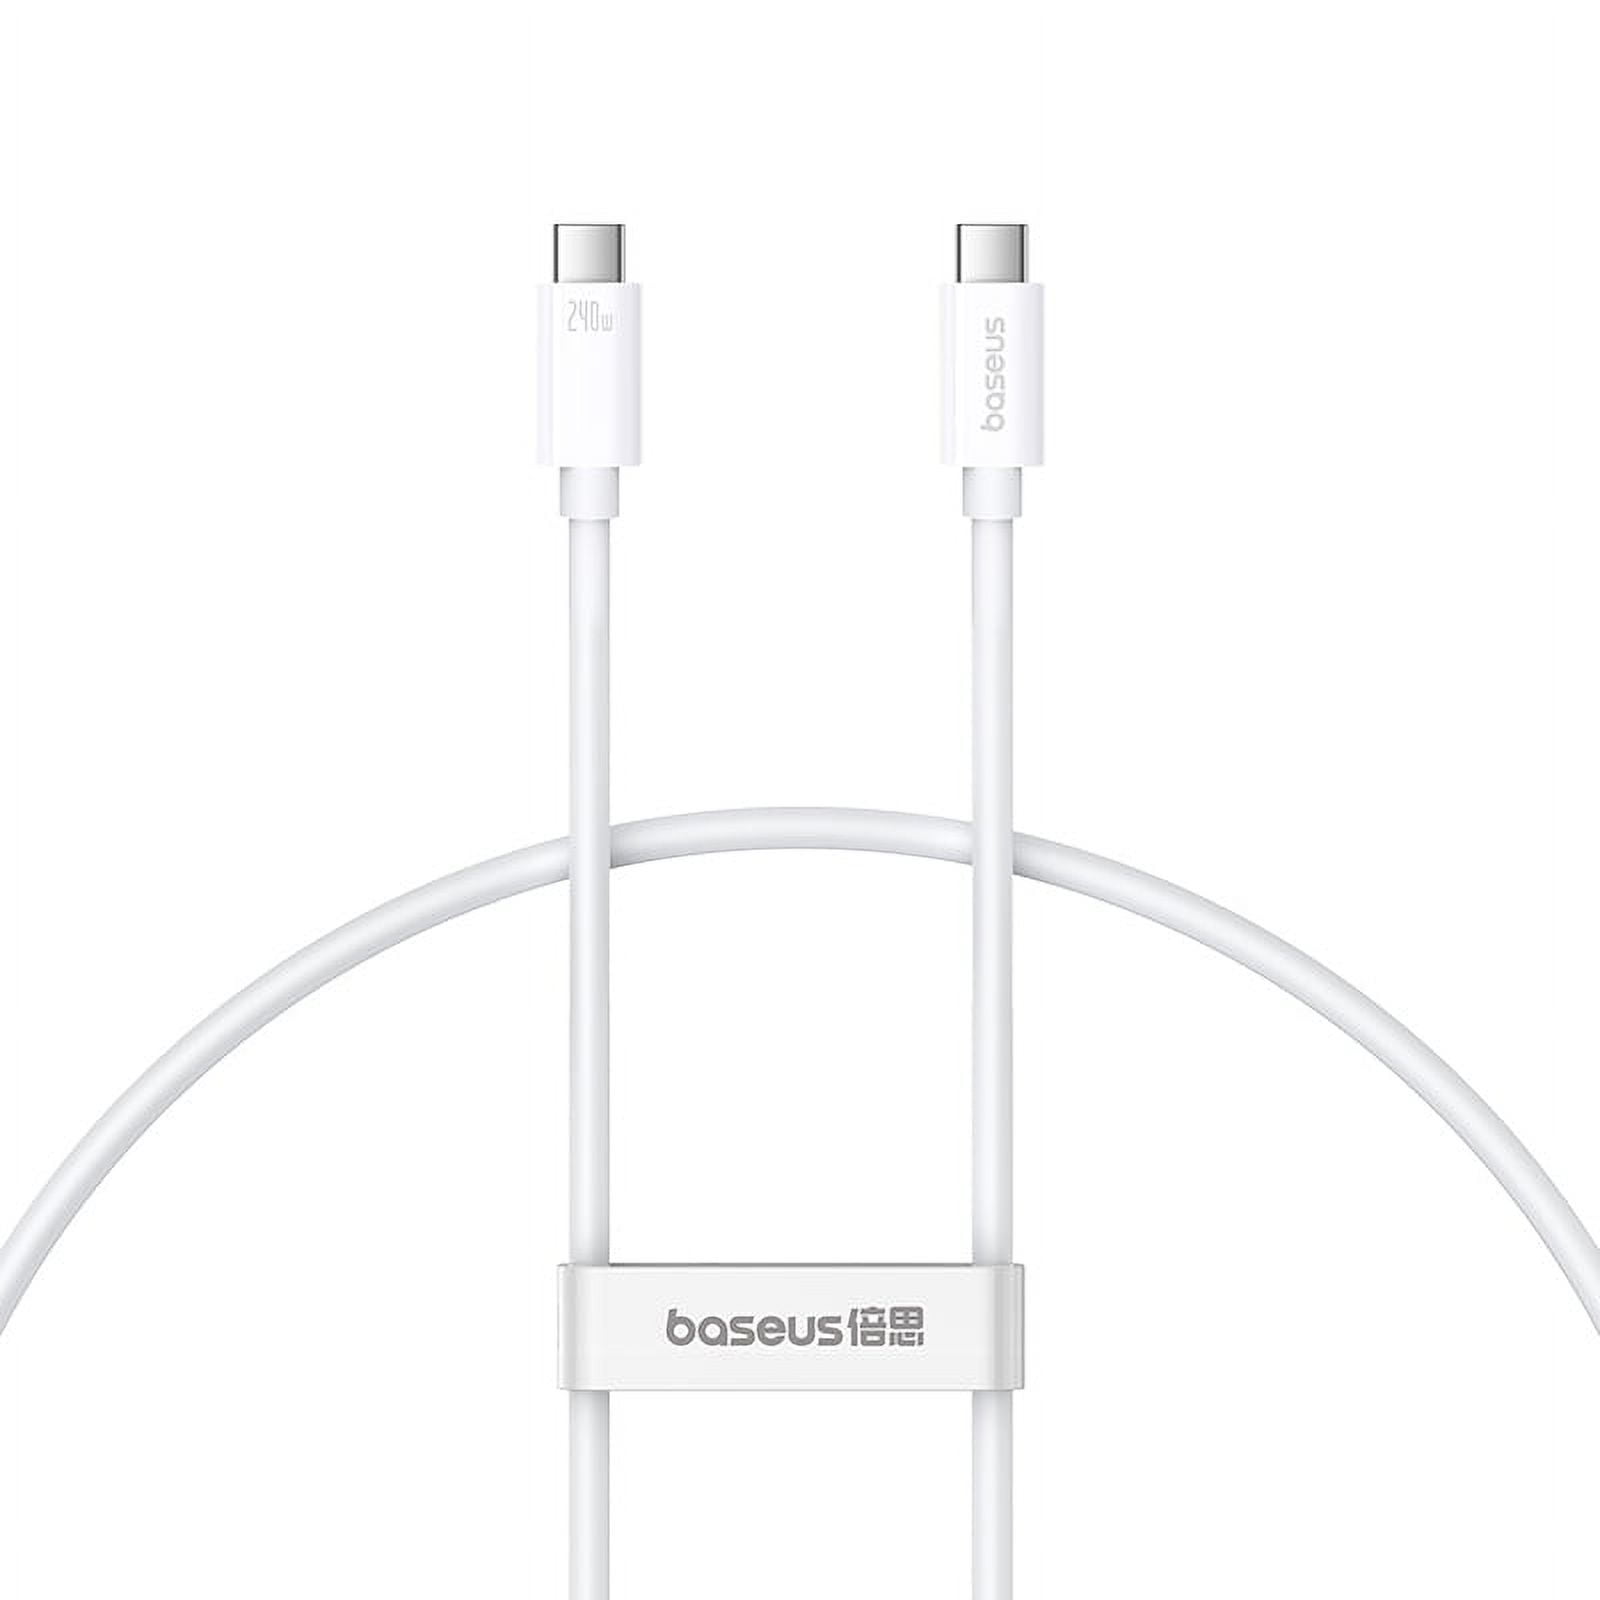 BASEE: 240W USB-C / USB-C CABLE